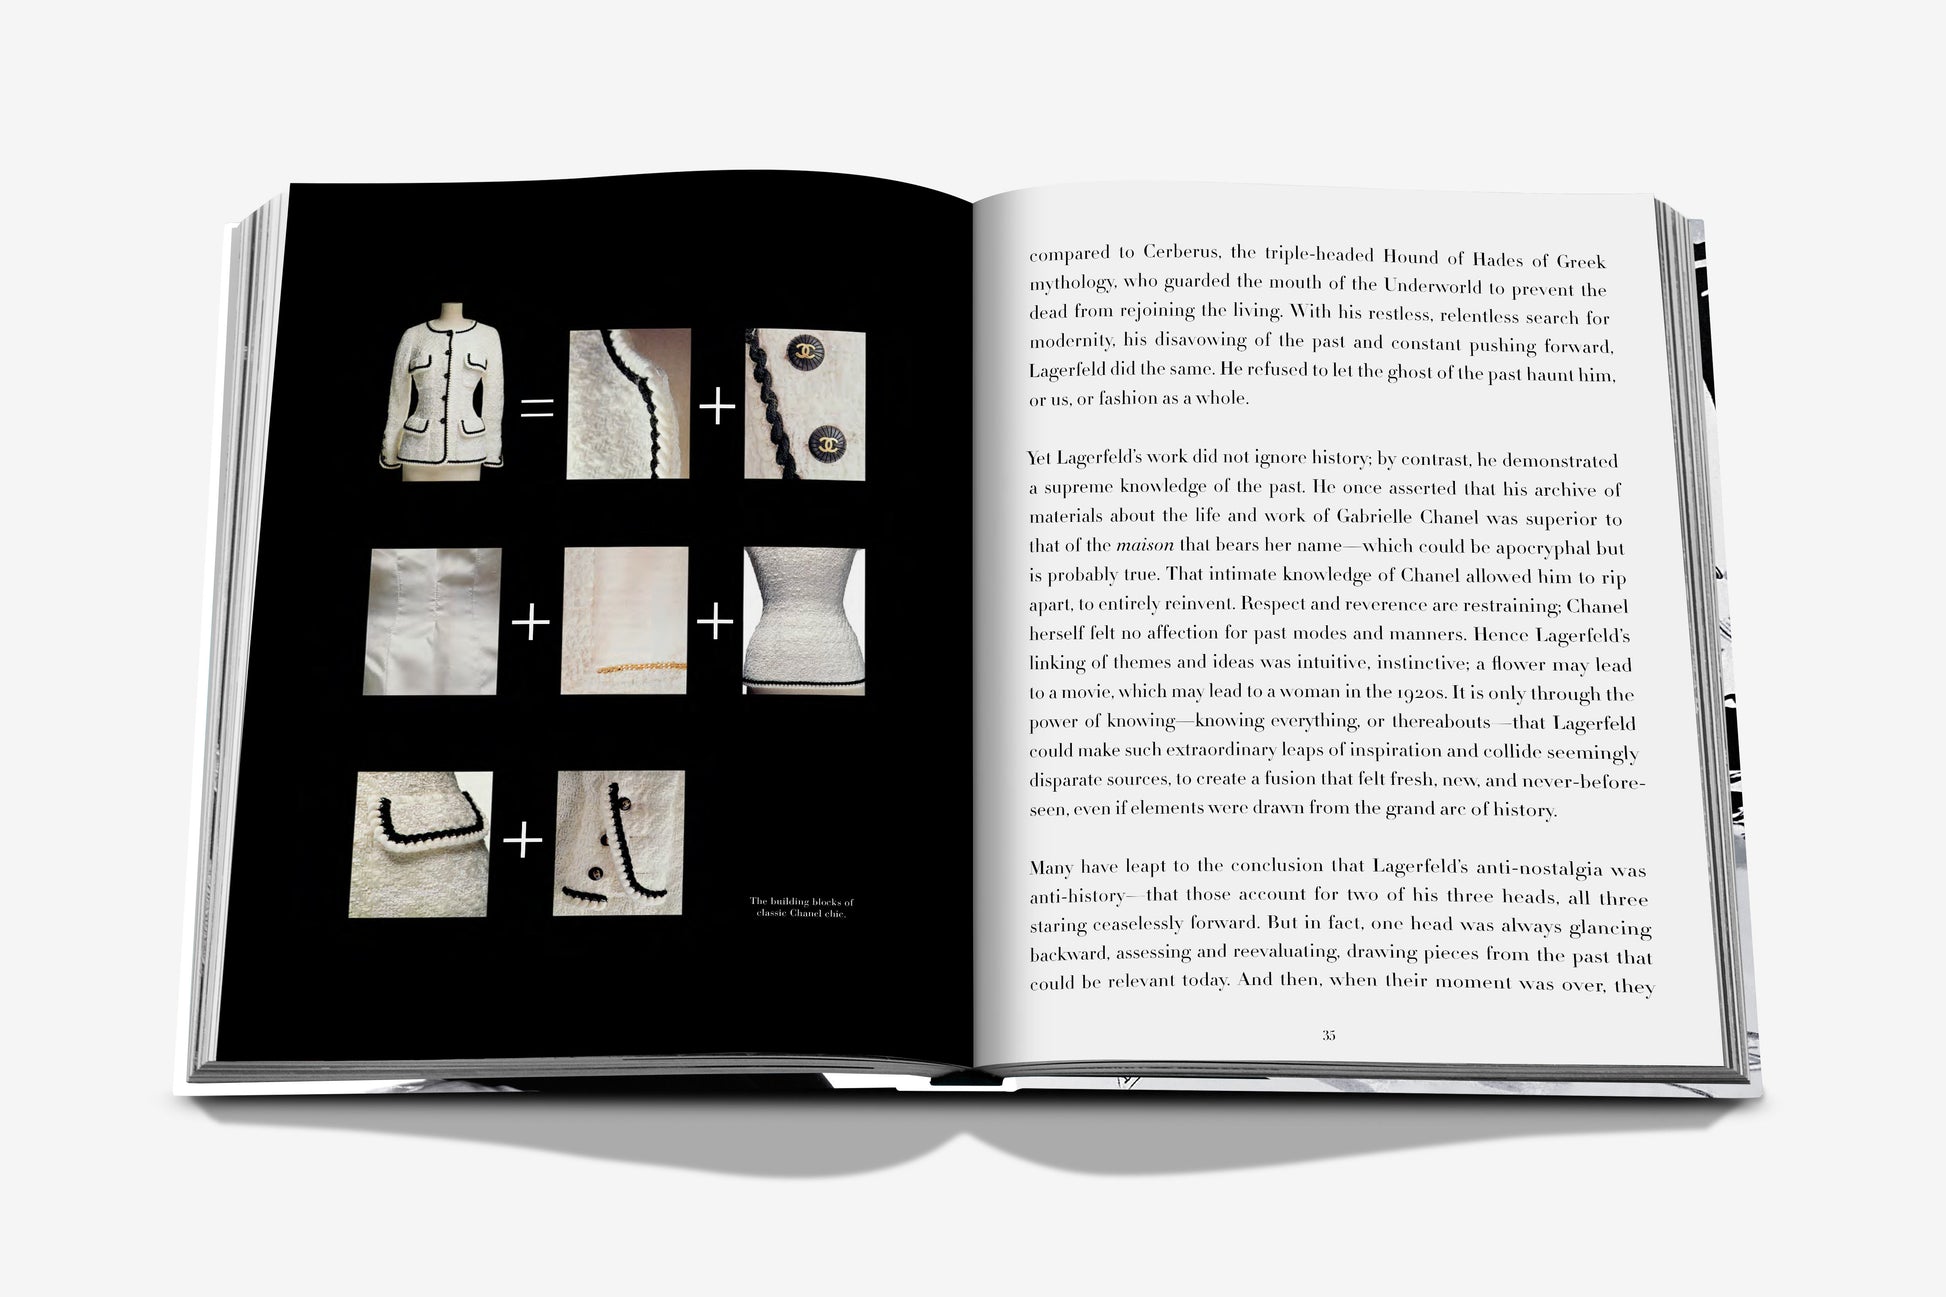 Assouline | Chanel: The Legend Of An Icon